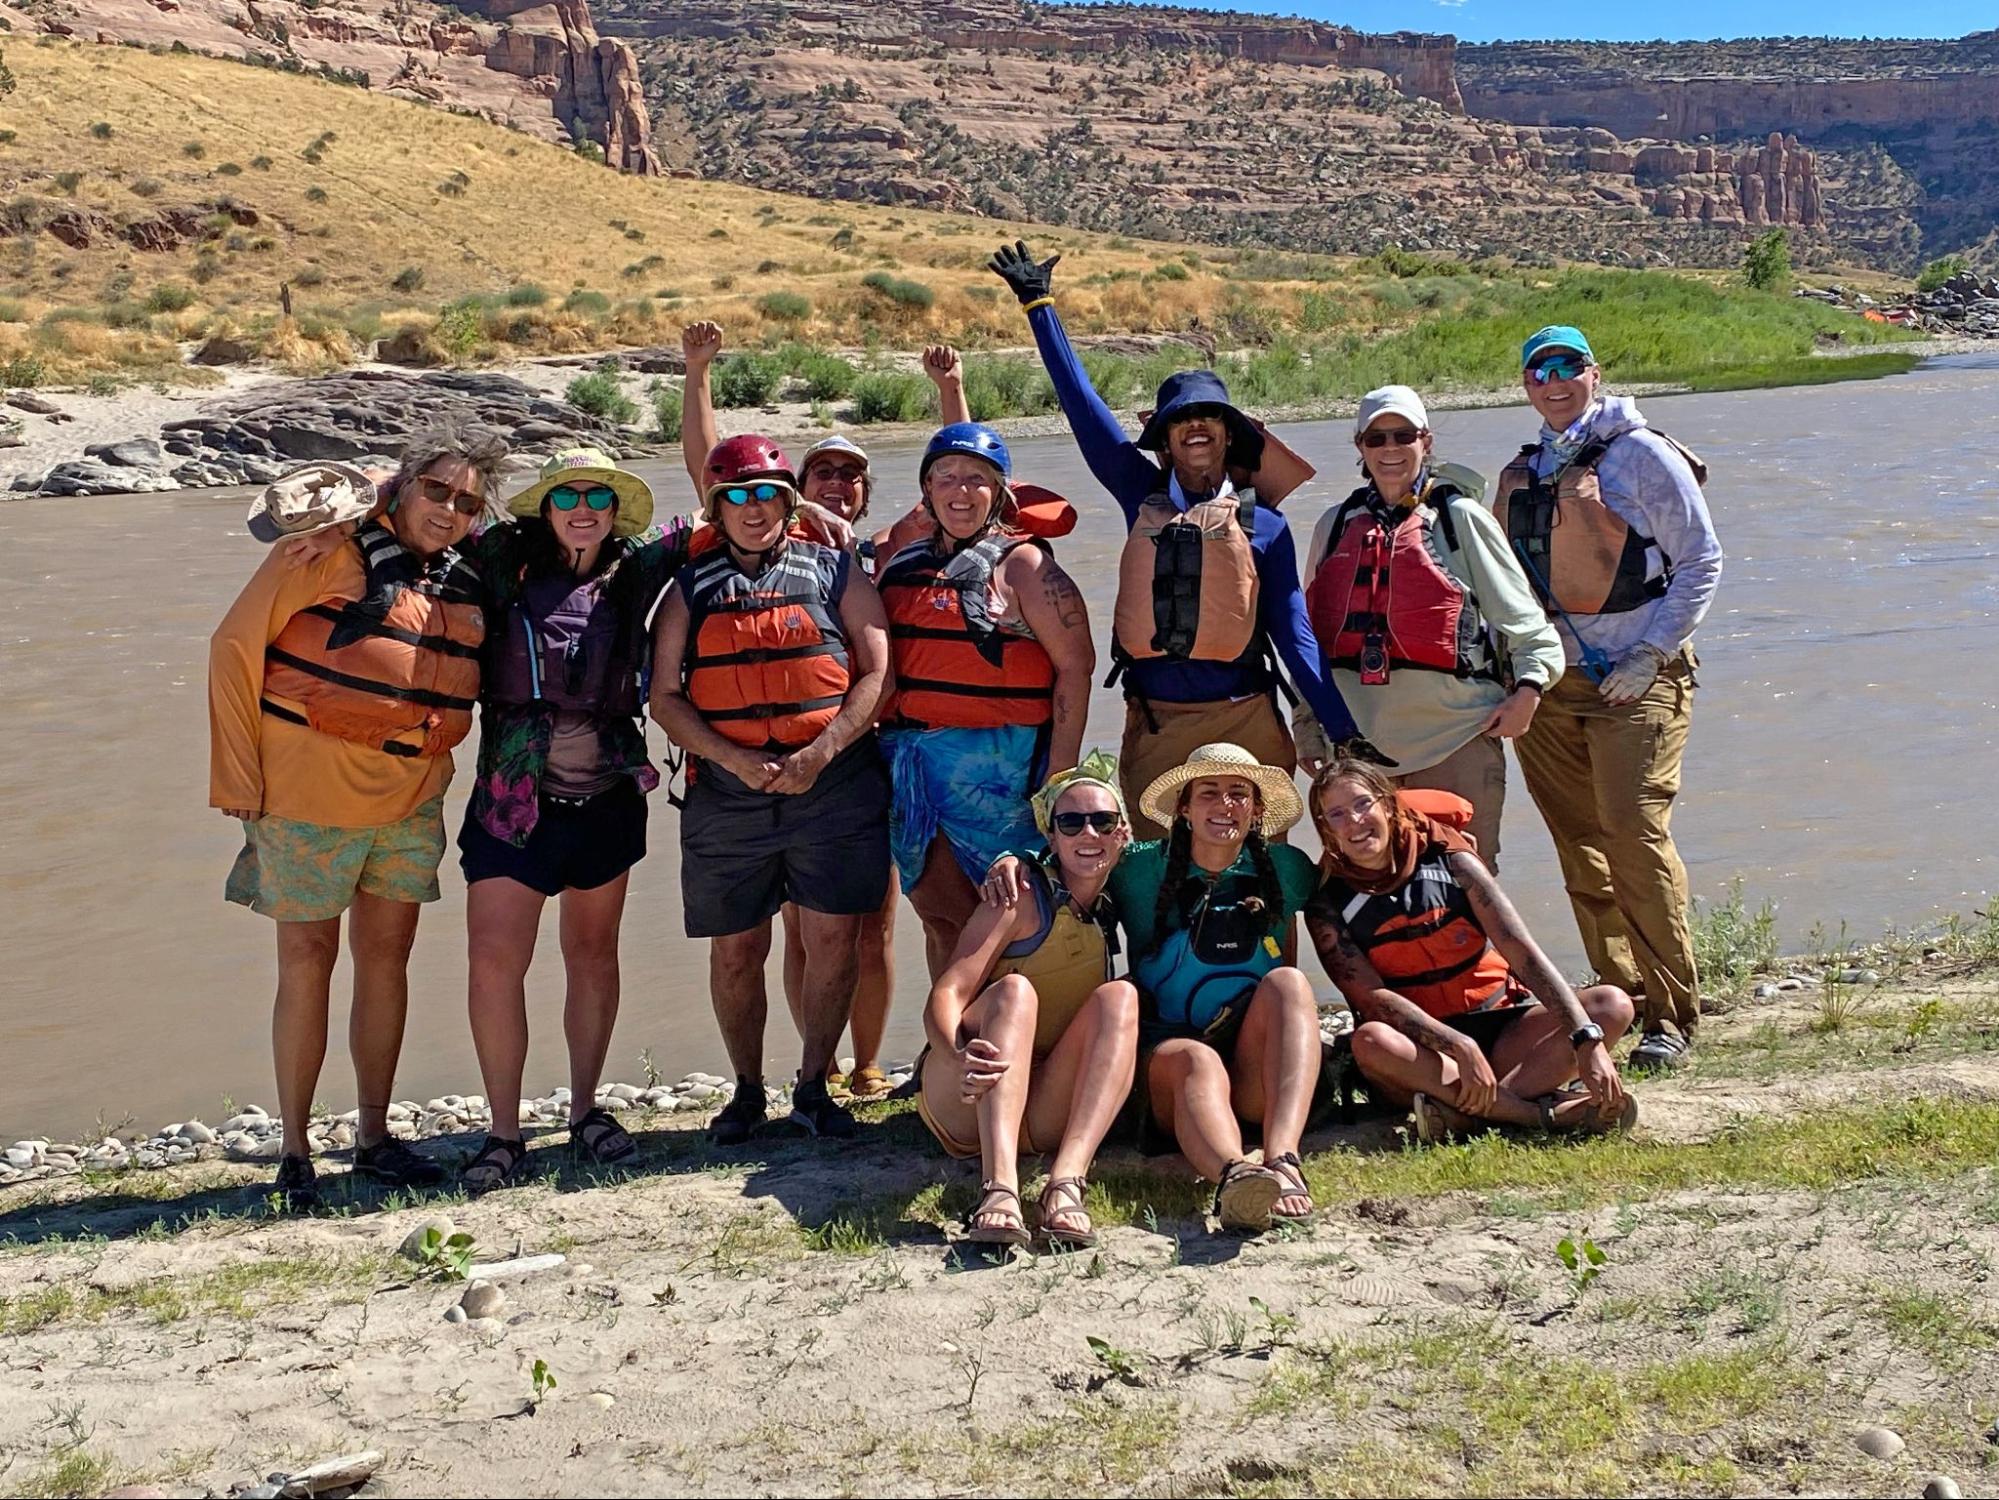 Lisa and the Women’s Heroic Military River Trip group last summer.